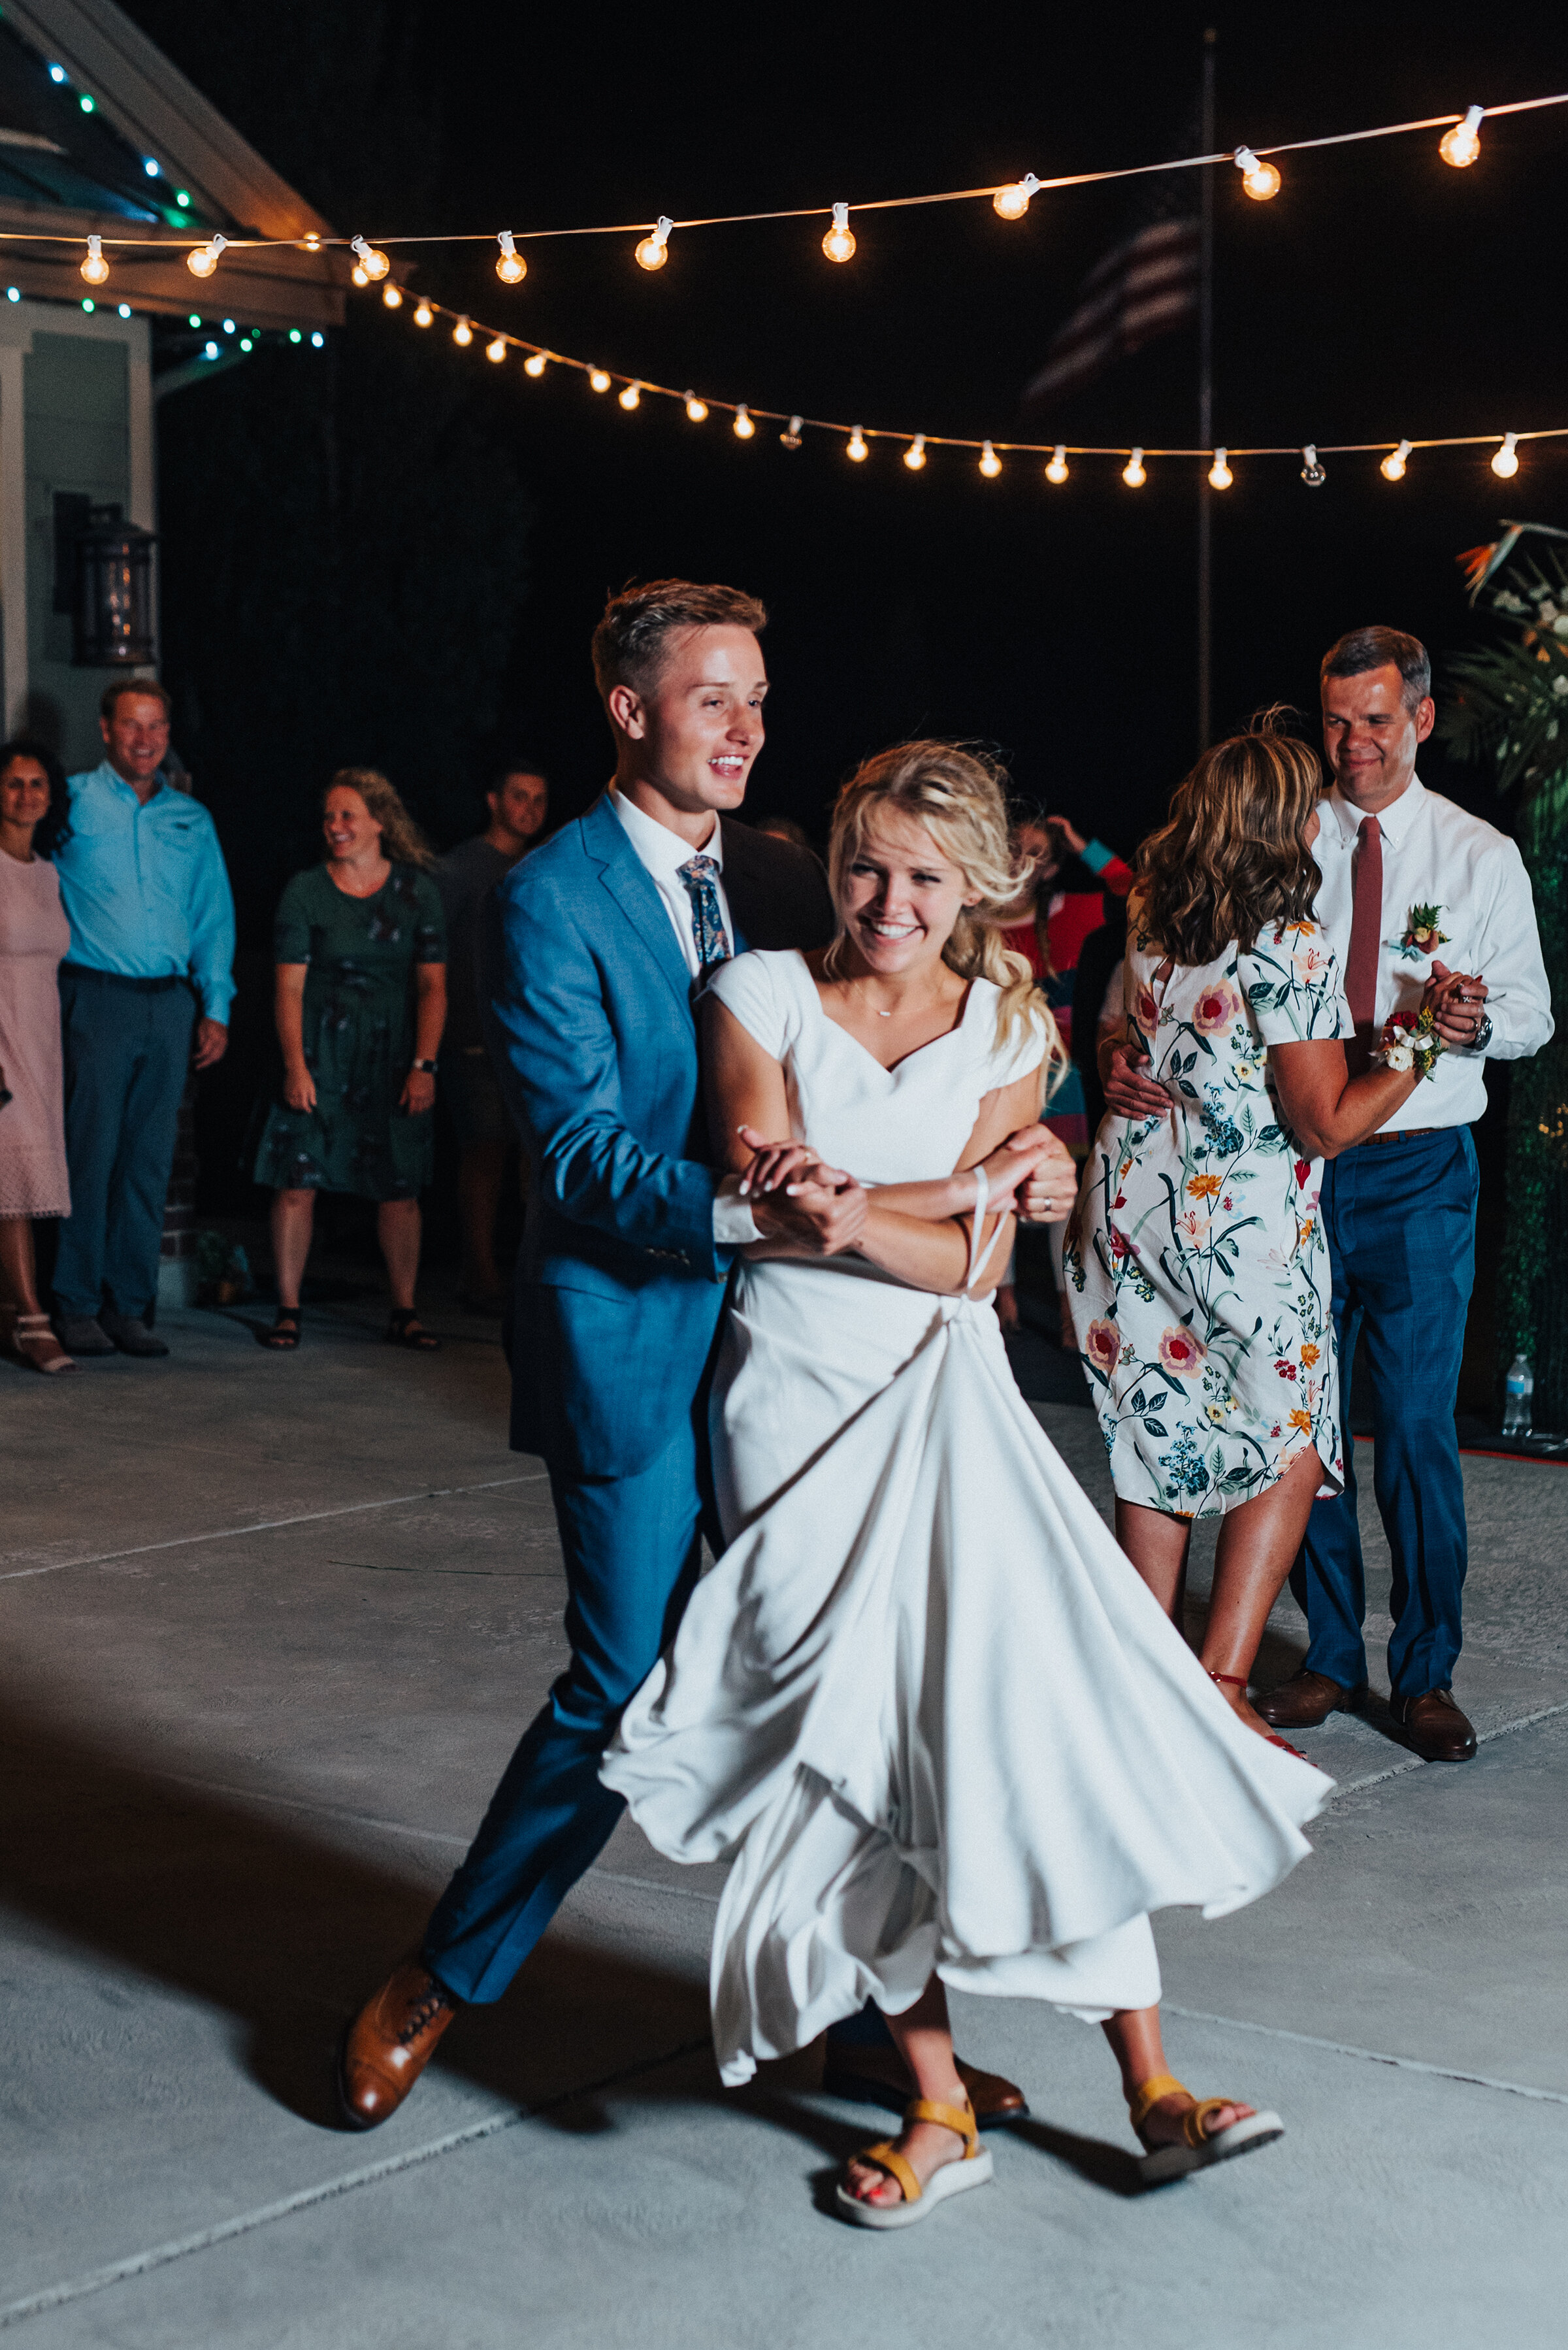  Dreamy first dance as Mr. and Mrs. at this charming backyard wedding in Park City. Kristi Alyse Photography Logan Utah photographer Park City wedding photographer Drive-Thru wedding COVID wedding neon signs socially distant wedding bride and groom first dance #kristialysephotography #weddingphotographer #utahweddings #parkcity #utahbrides #drivethruwedding #covidwedding #LoganUtahphotographer #utahweddingphotographer #firstdance 